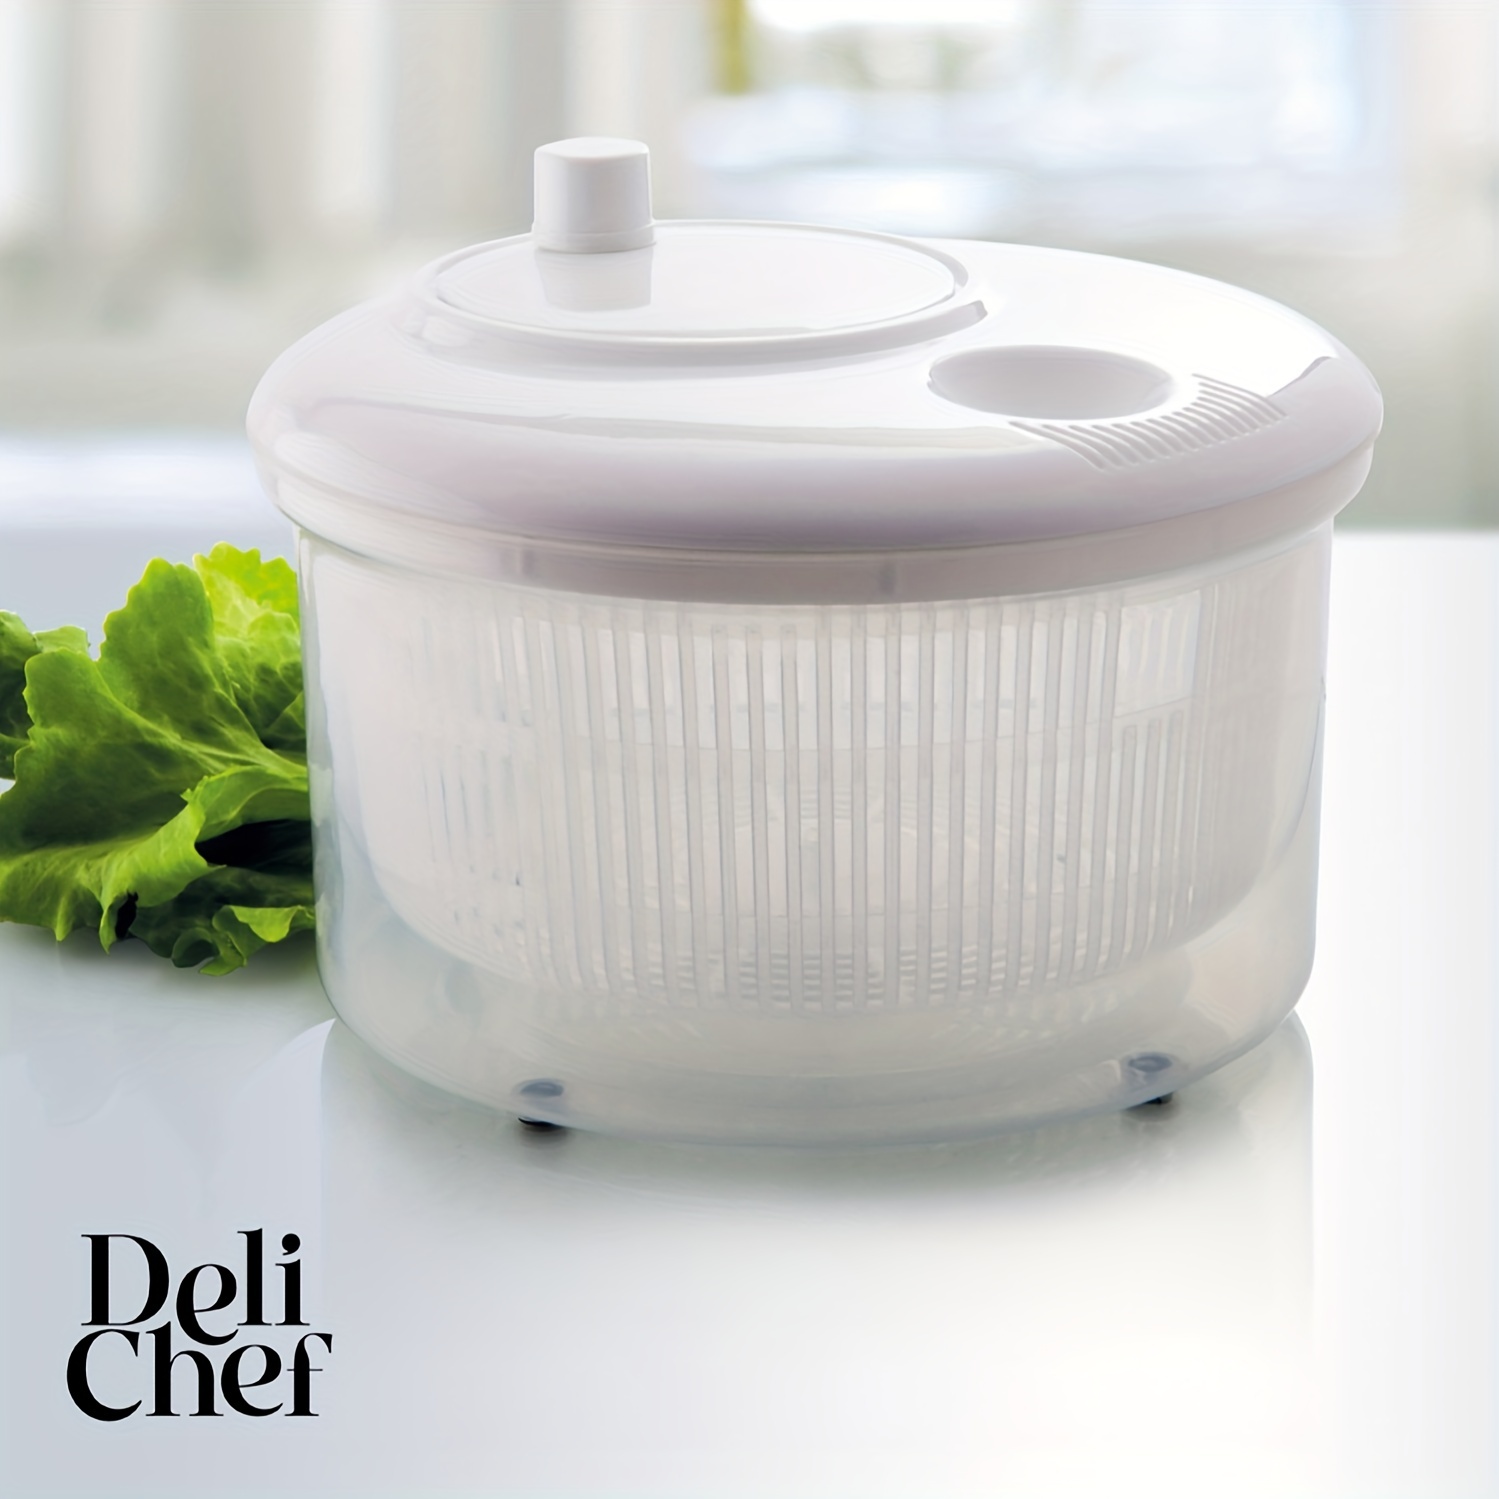 1pc Salad Spinner With Food Grade Material Bowl,Large Manual Salad And  Vegetable Washer,Rotating DryerHousehold Fruit Dehydrator - AliExpress